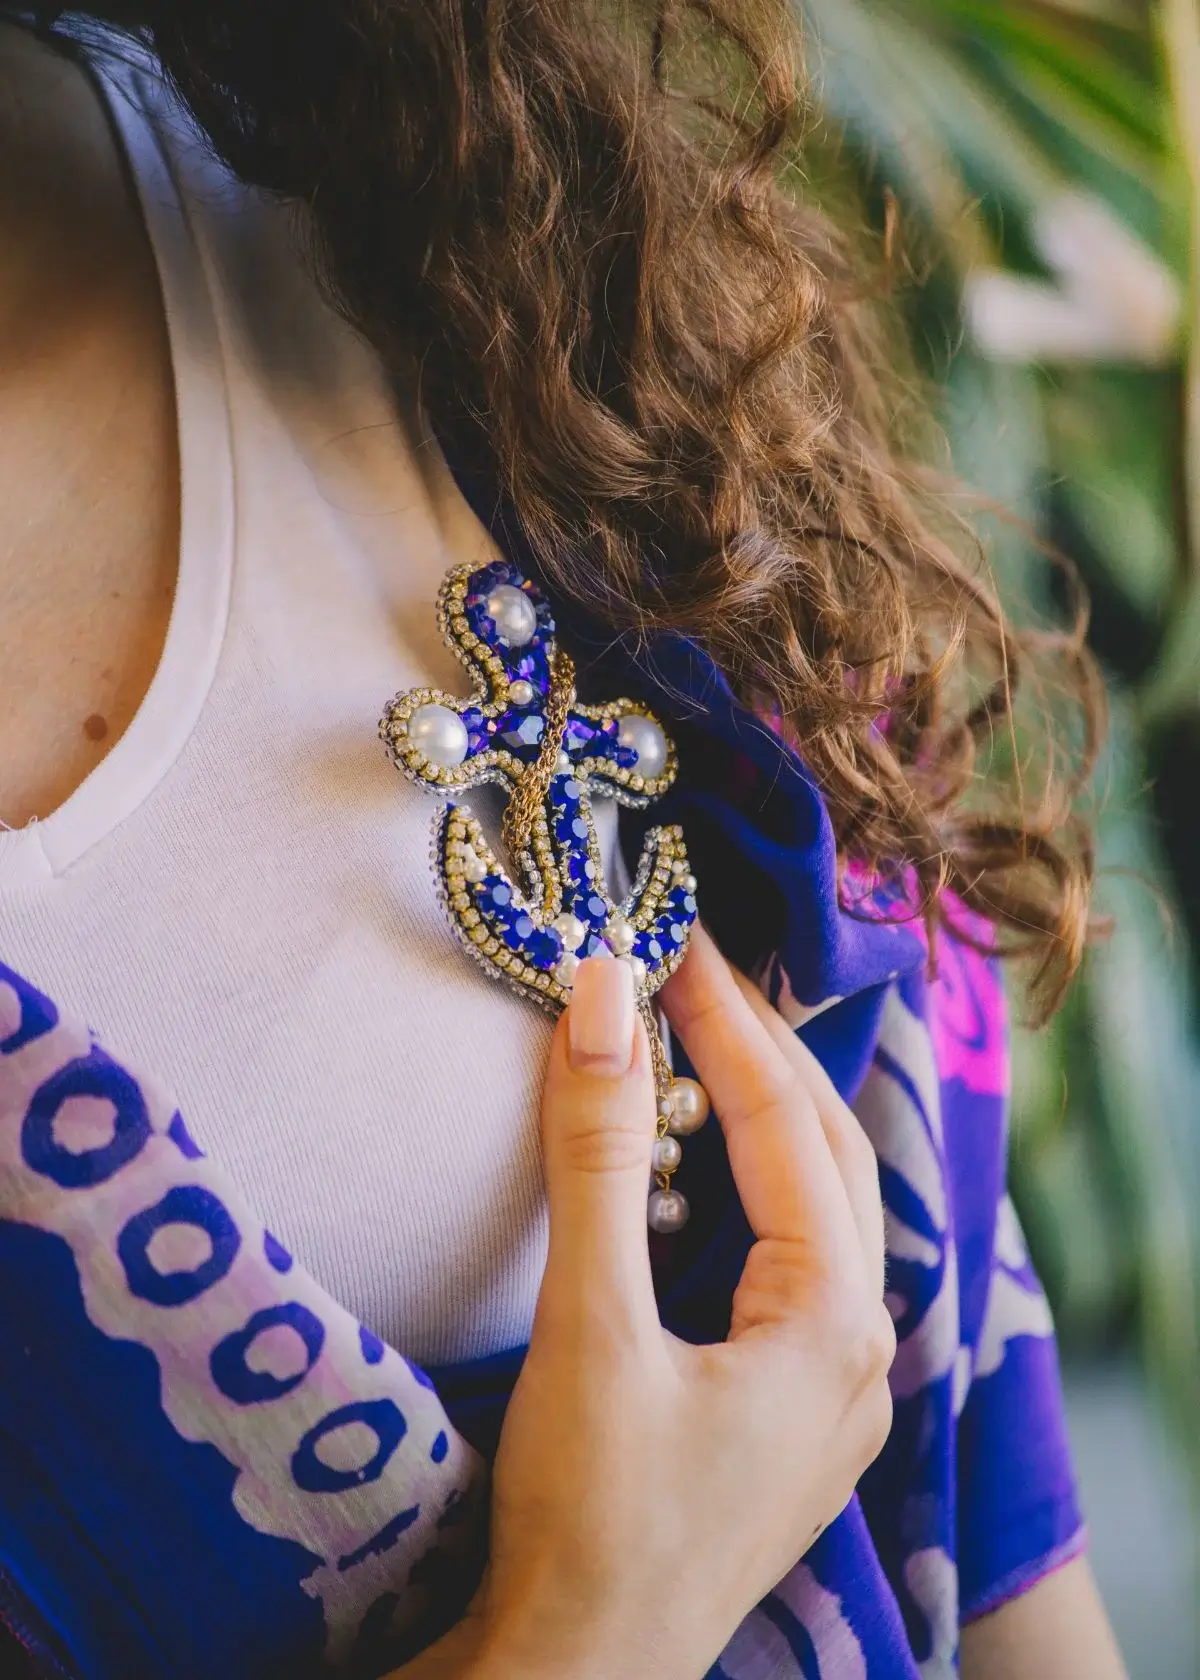 How to choose the right Brooches For Women?